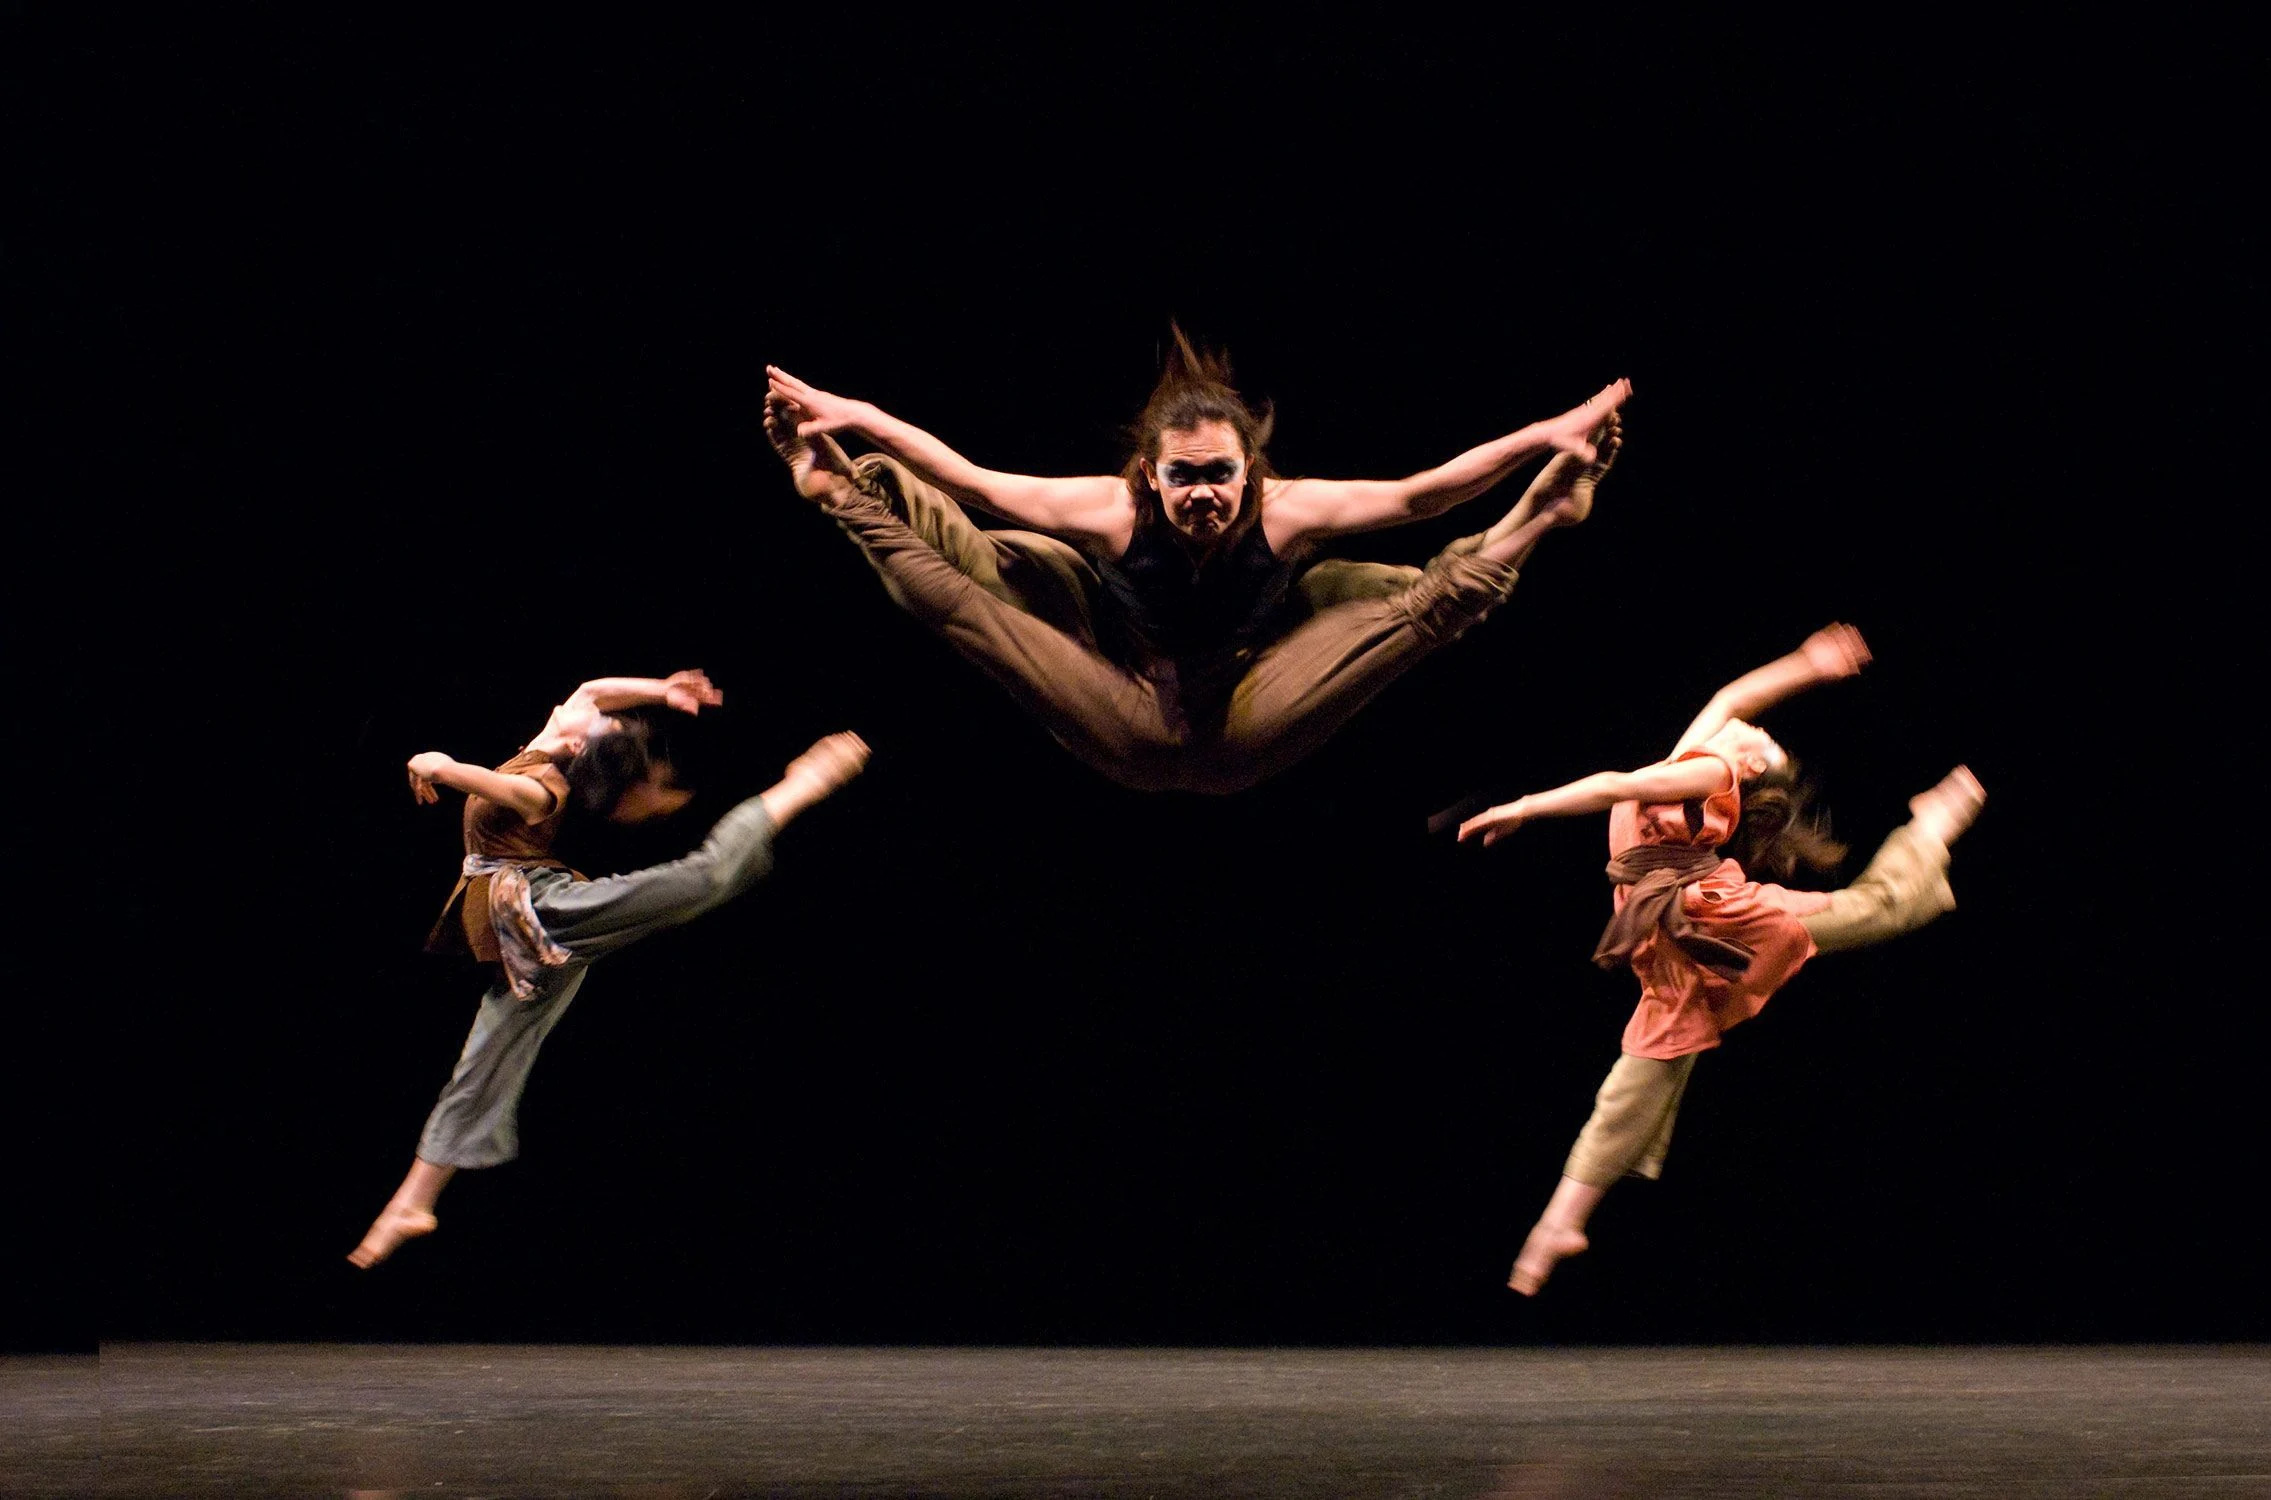 Contemporary Dance: Blending elements of multiple dance styles, Expression, Dance moves. 2280x1500 HD Wallpaper.